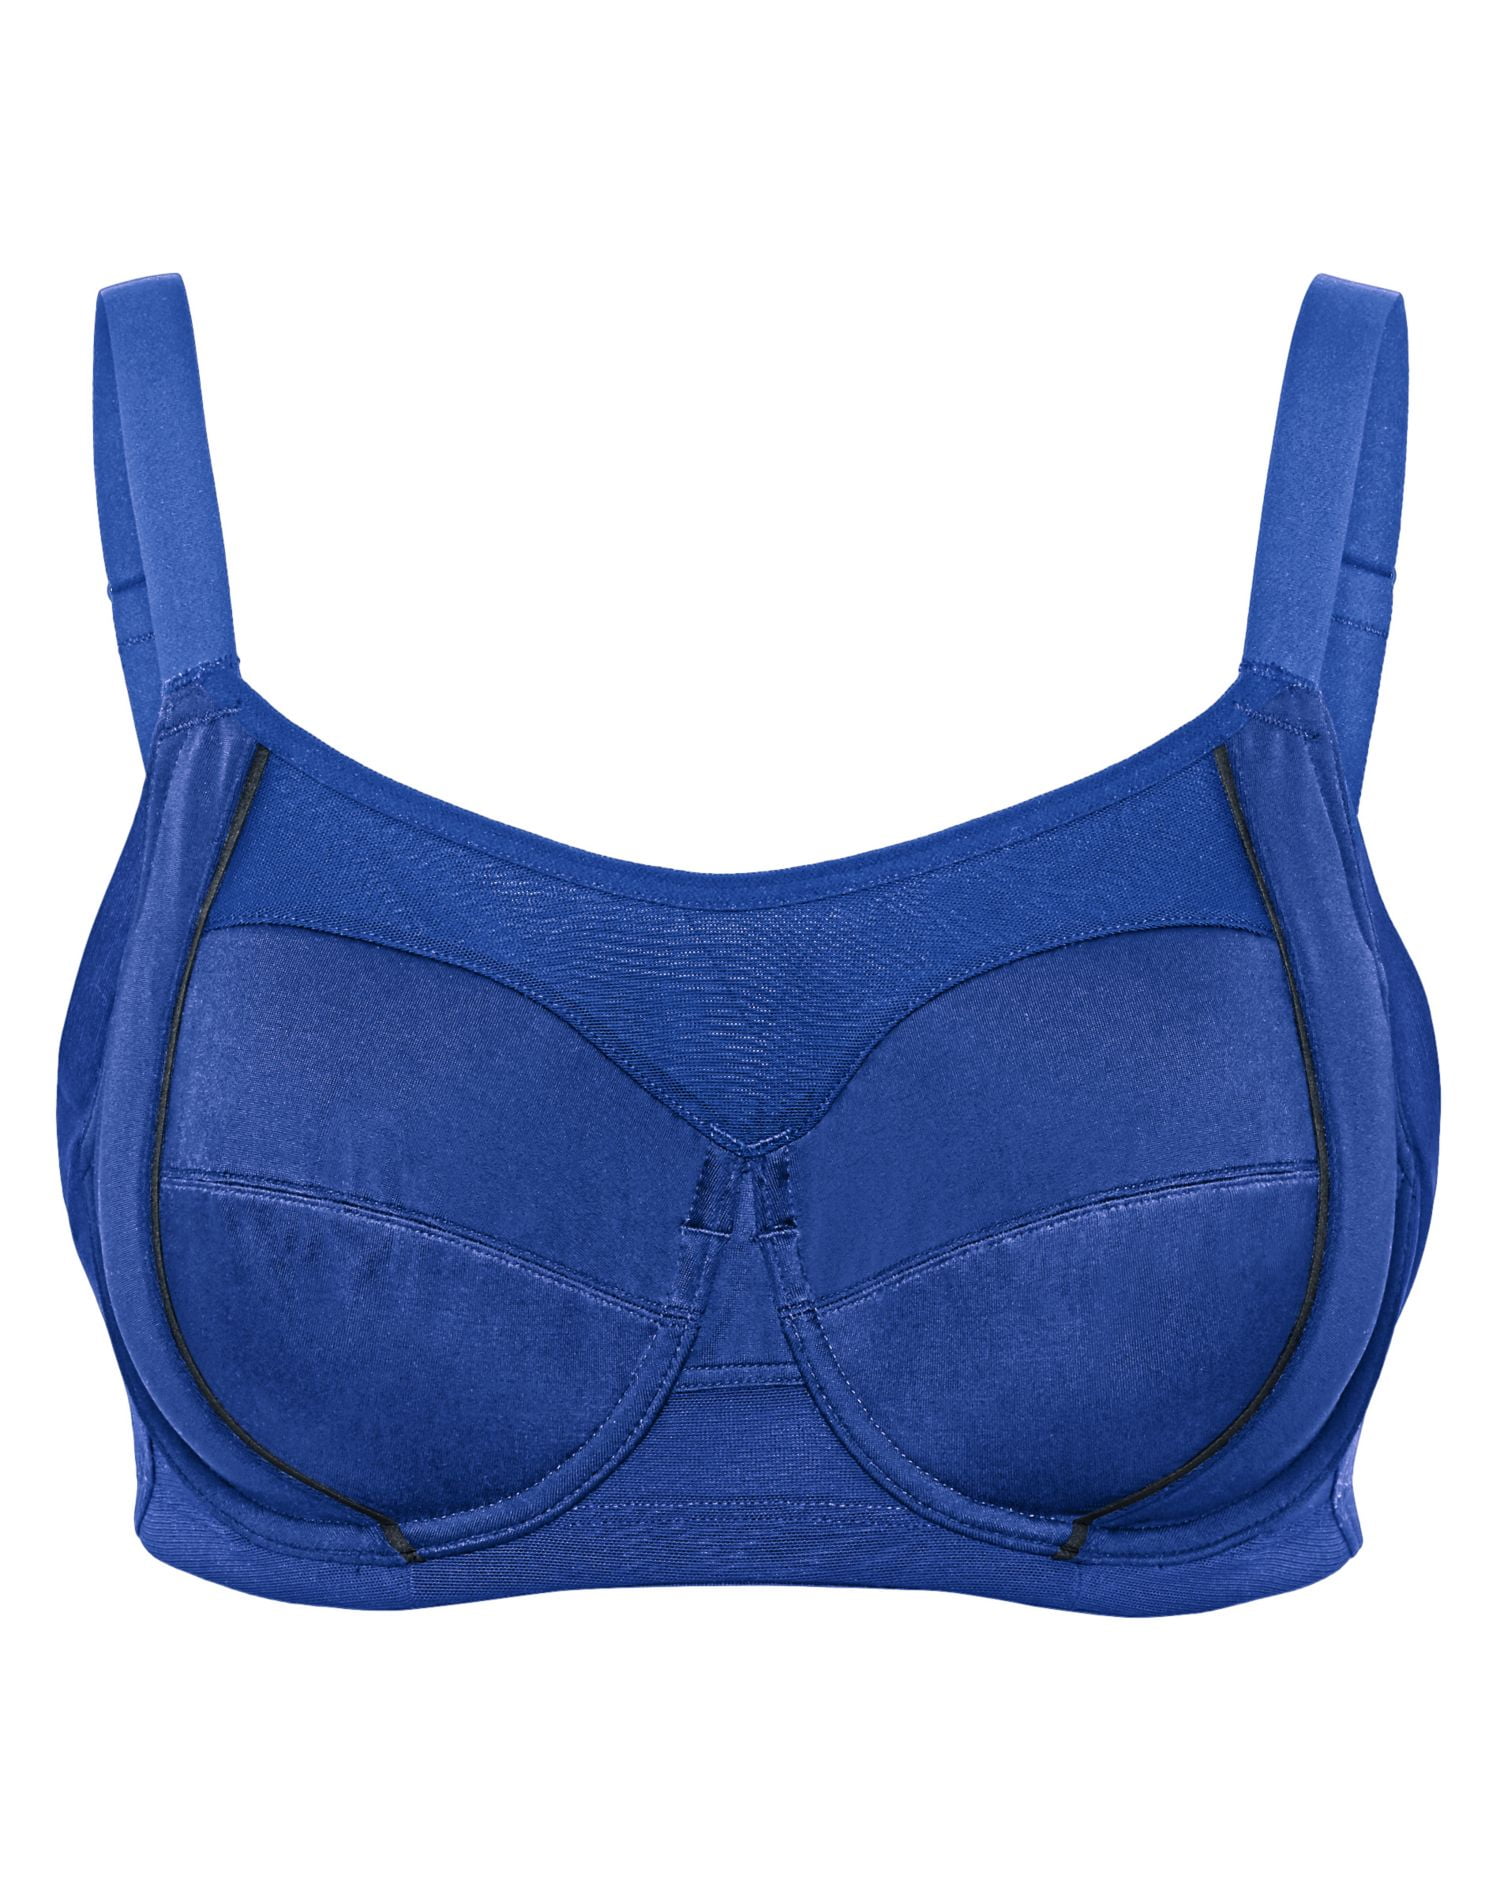 Champion - Champion Womens The Smoother Sports Bra, 42C, Surf The Web ...